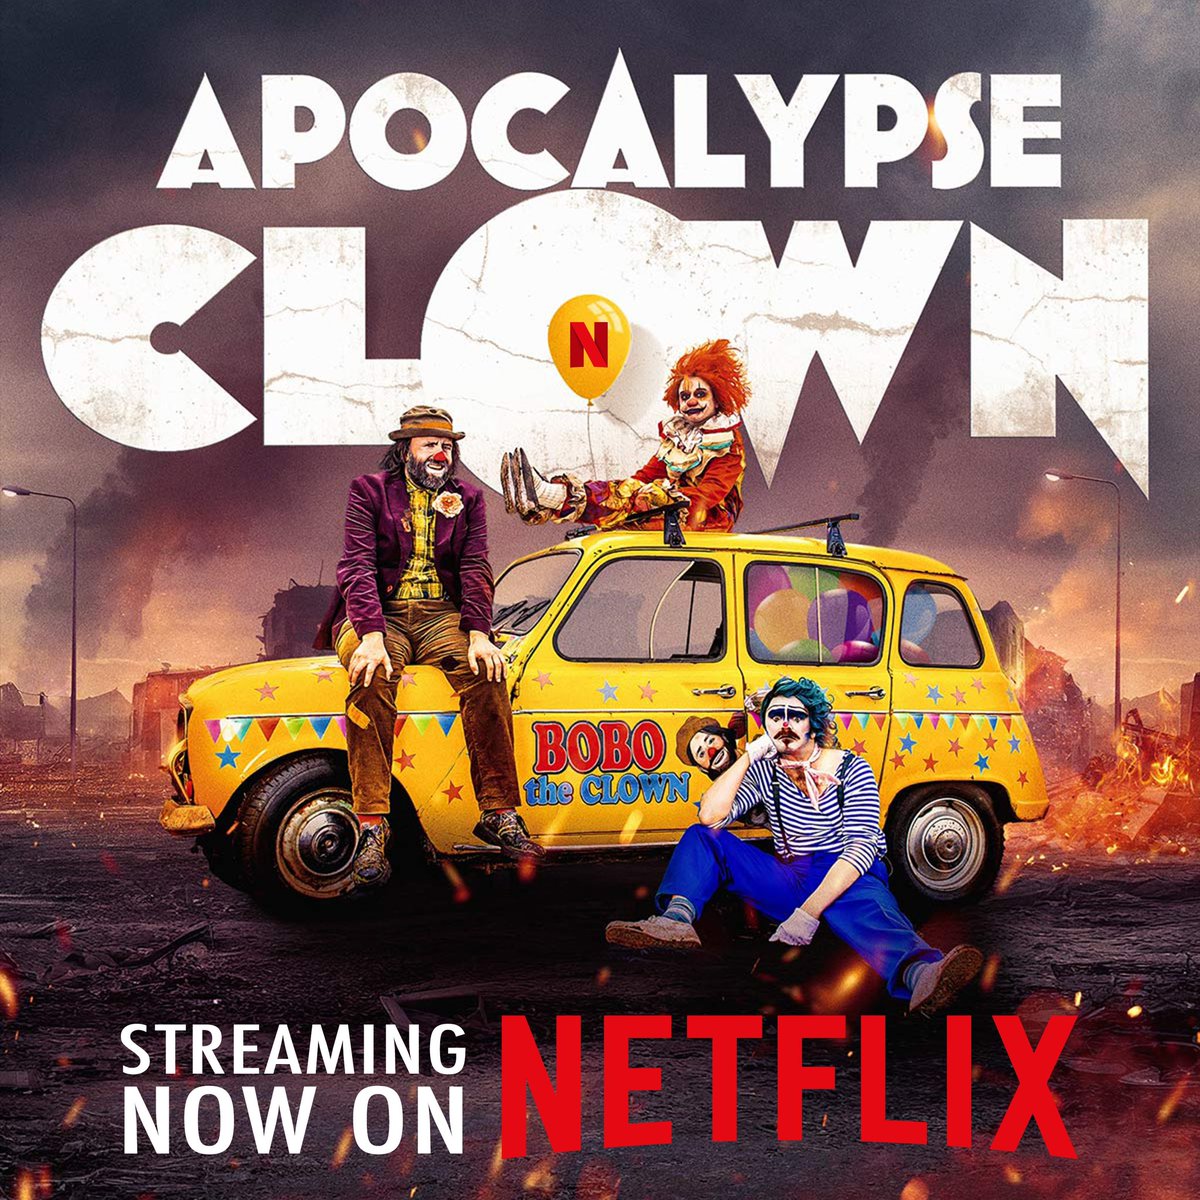 Merry Clownmas everyone! #ApocalypseClown is now streaming in the UK and Ireland on @NetflixUK.